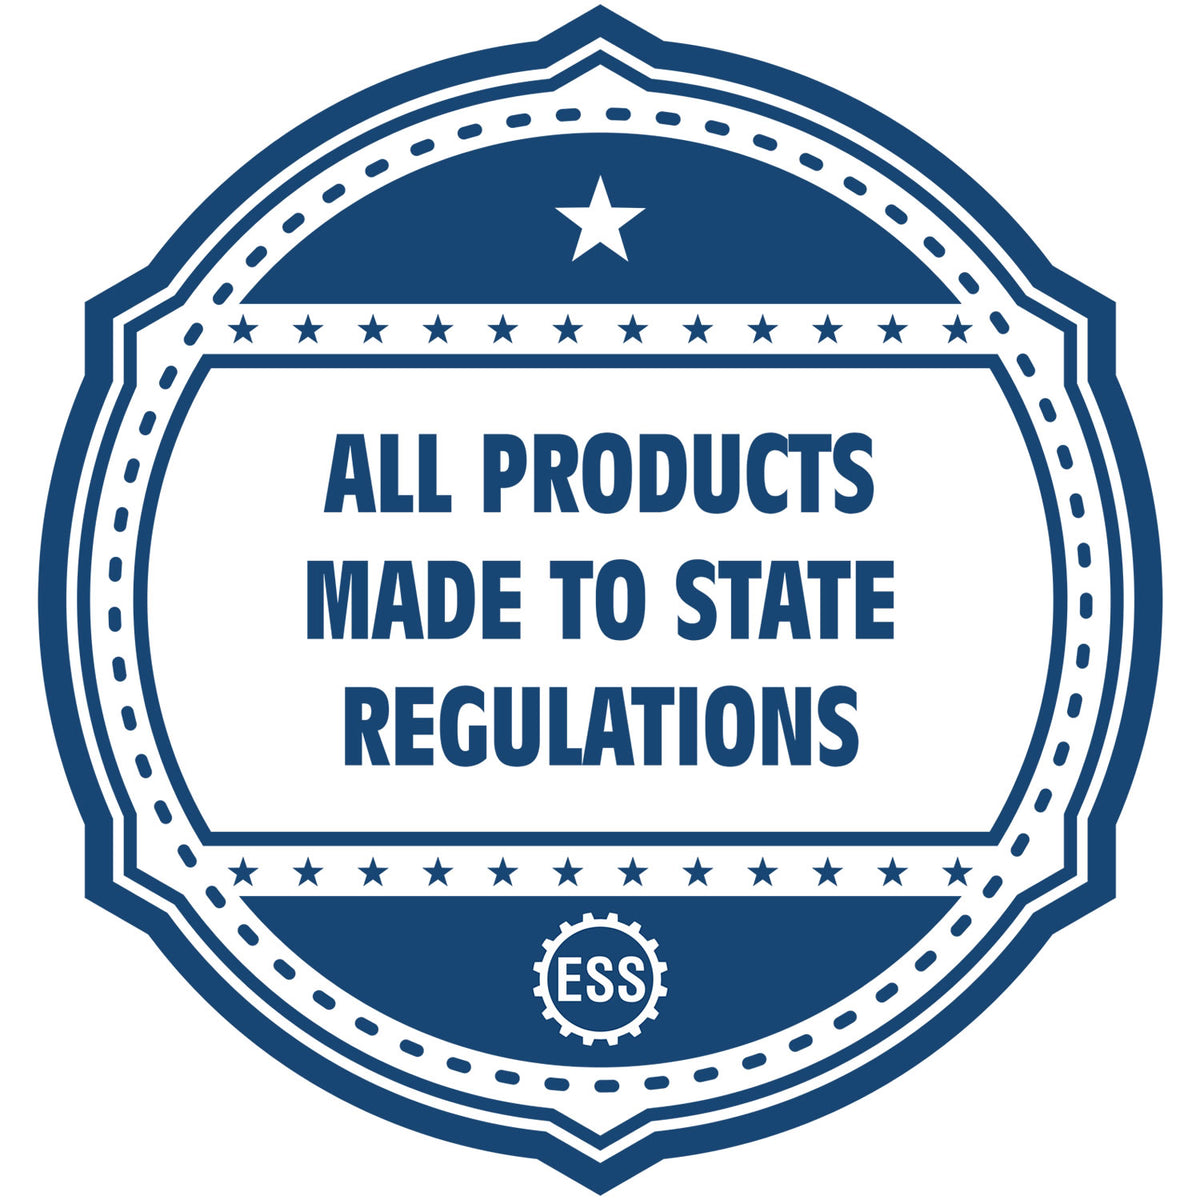 An icon or badge element for the Extended Long Reach Nebraska Architect Seal Embosser showing that this product is made in compliance with state regulations.